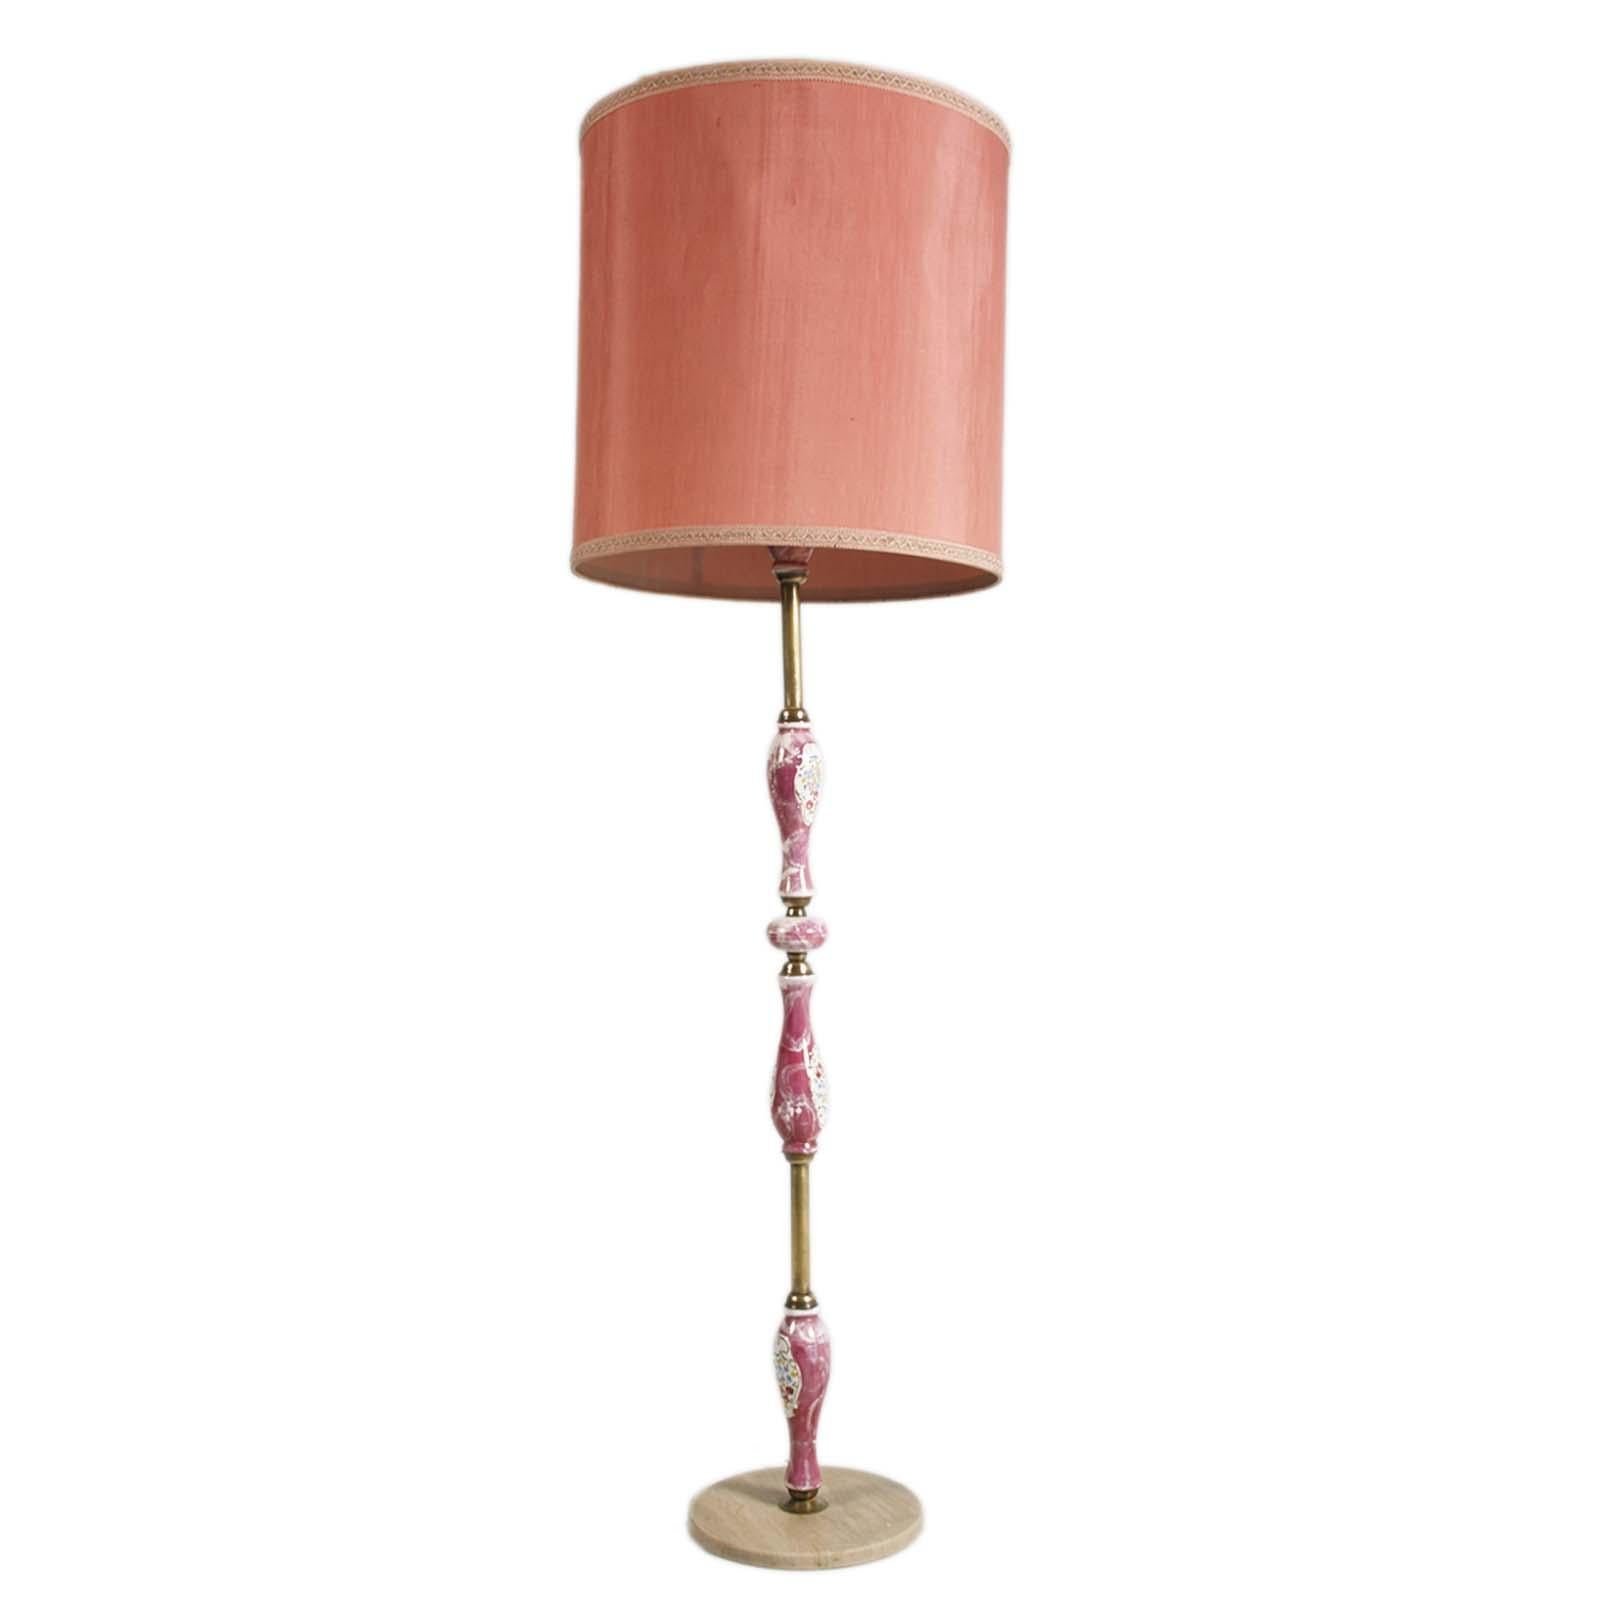 Art Deco Floor Lamp with Gilt Brass Stem with Inserts Richard Ginori Porcelain For Sale 1